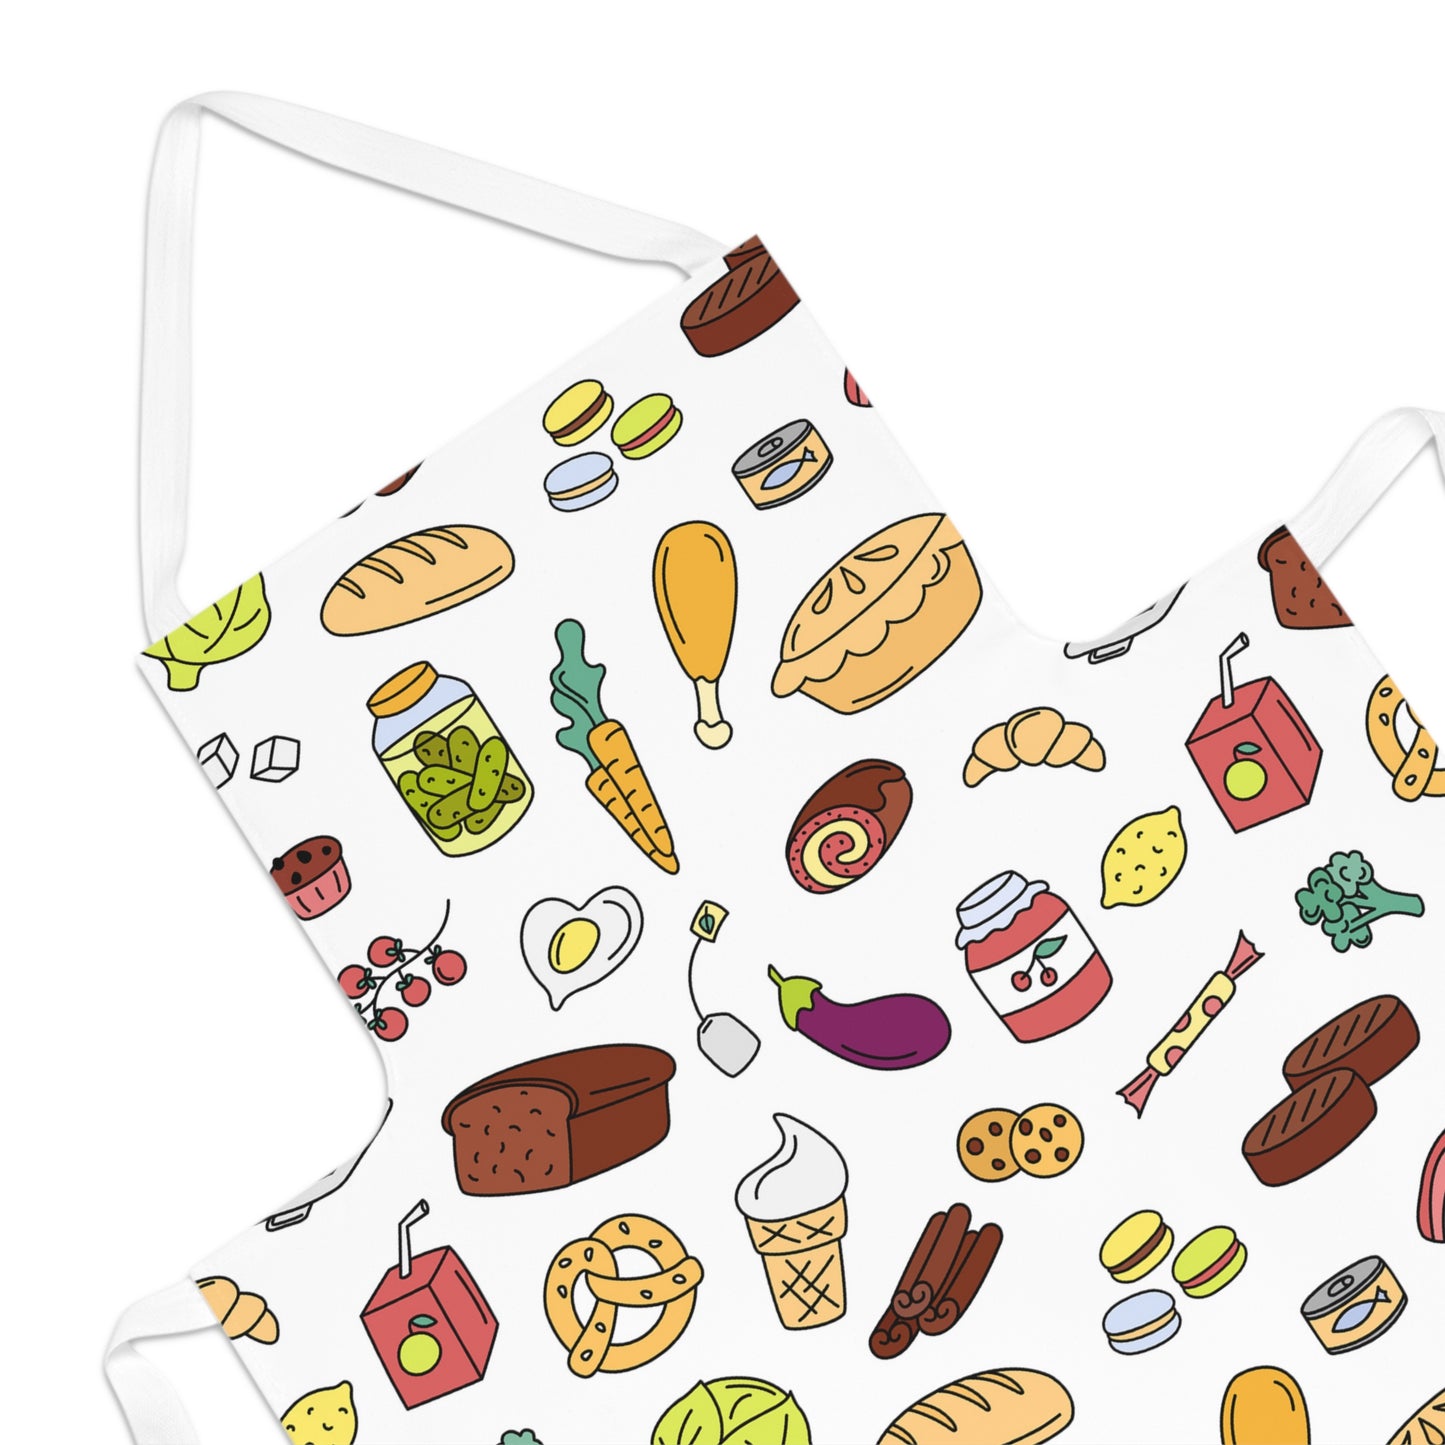 Adult Apron with food items